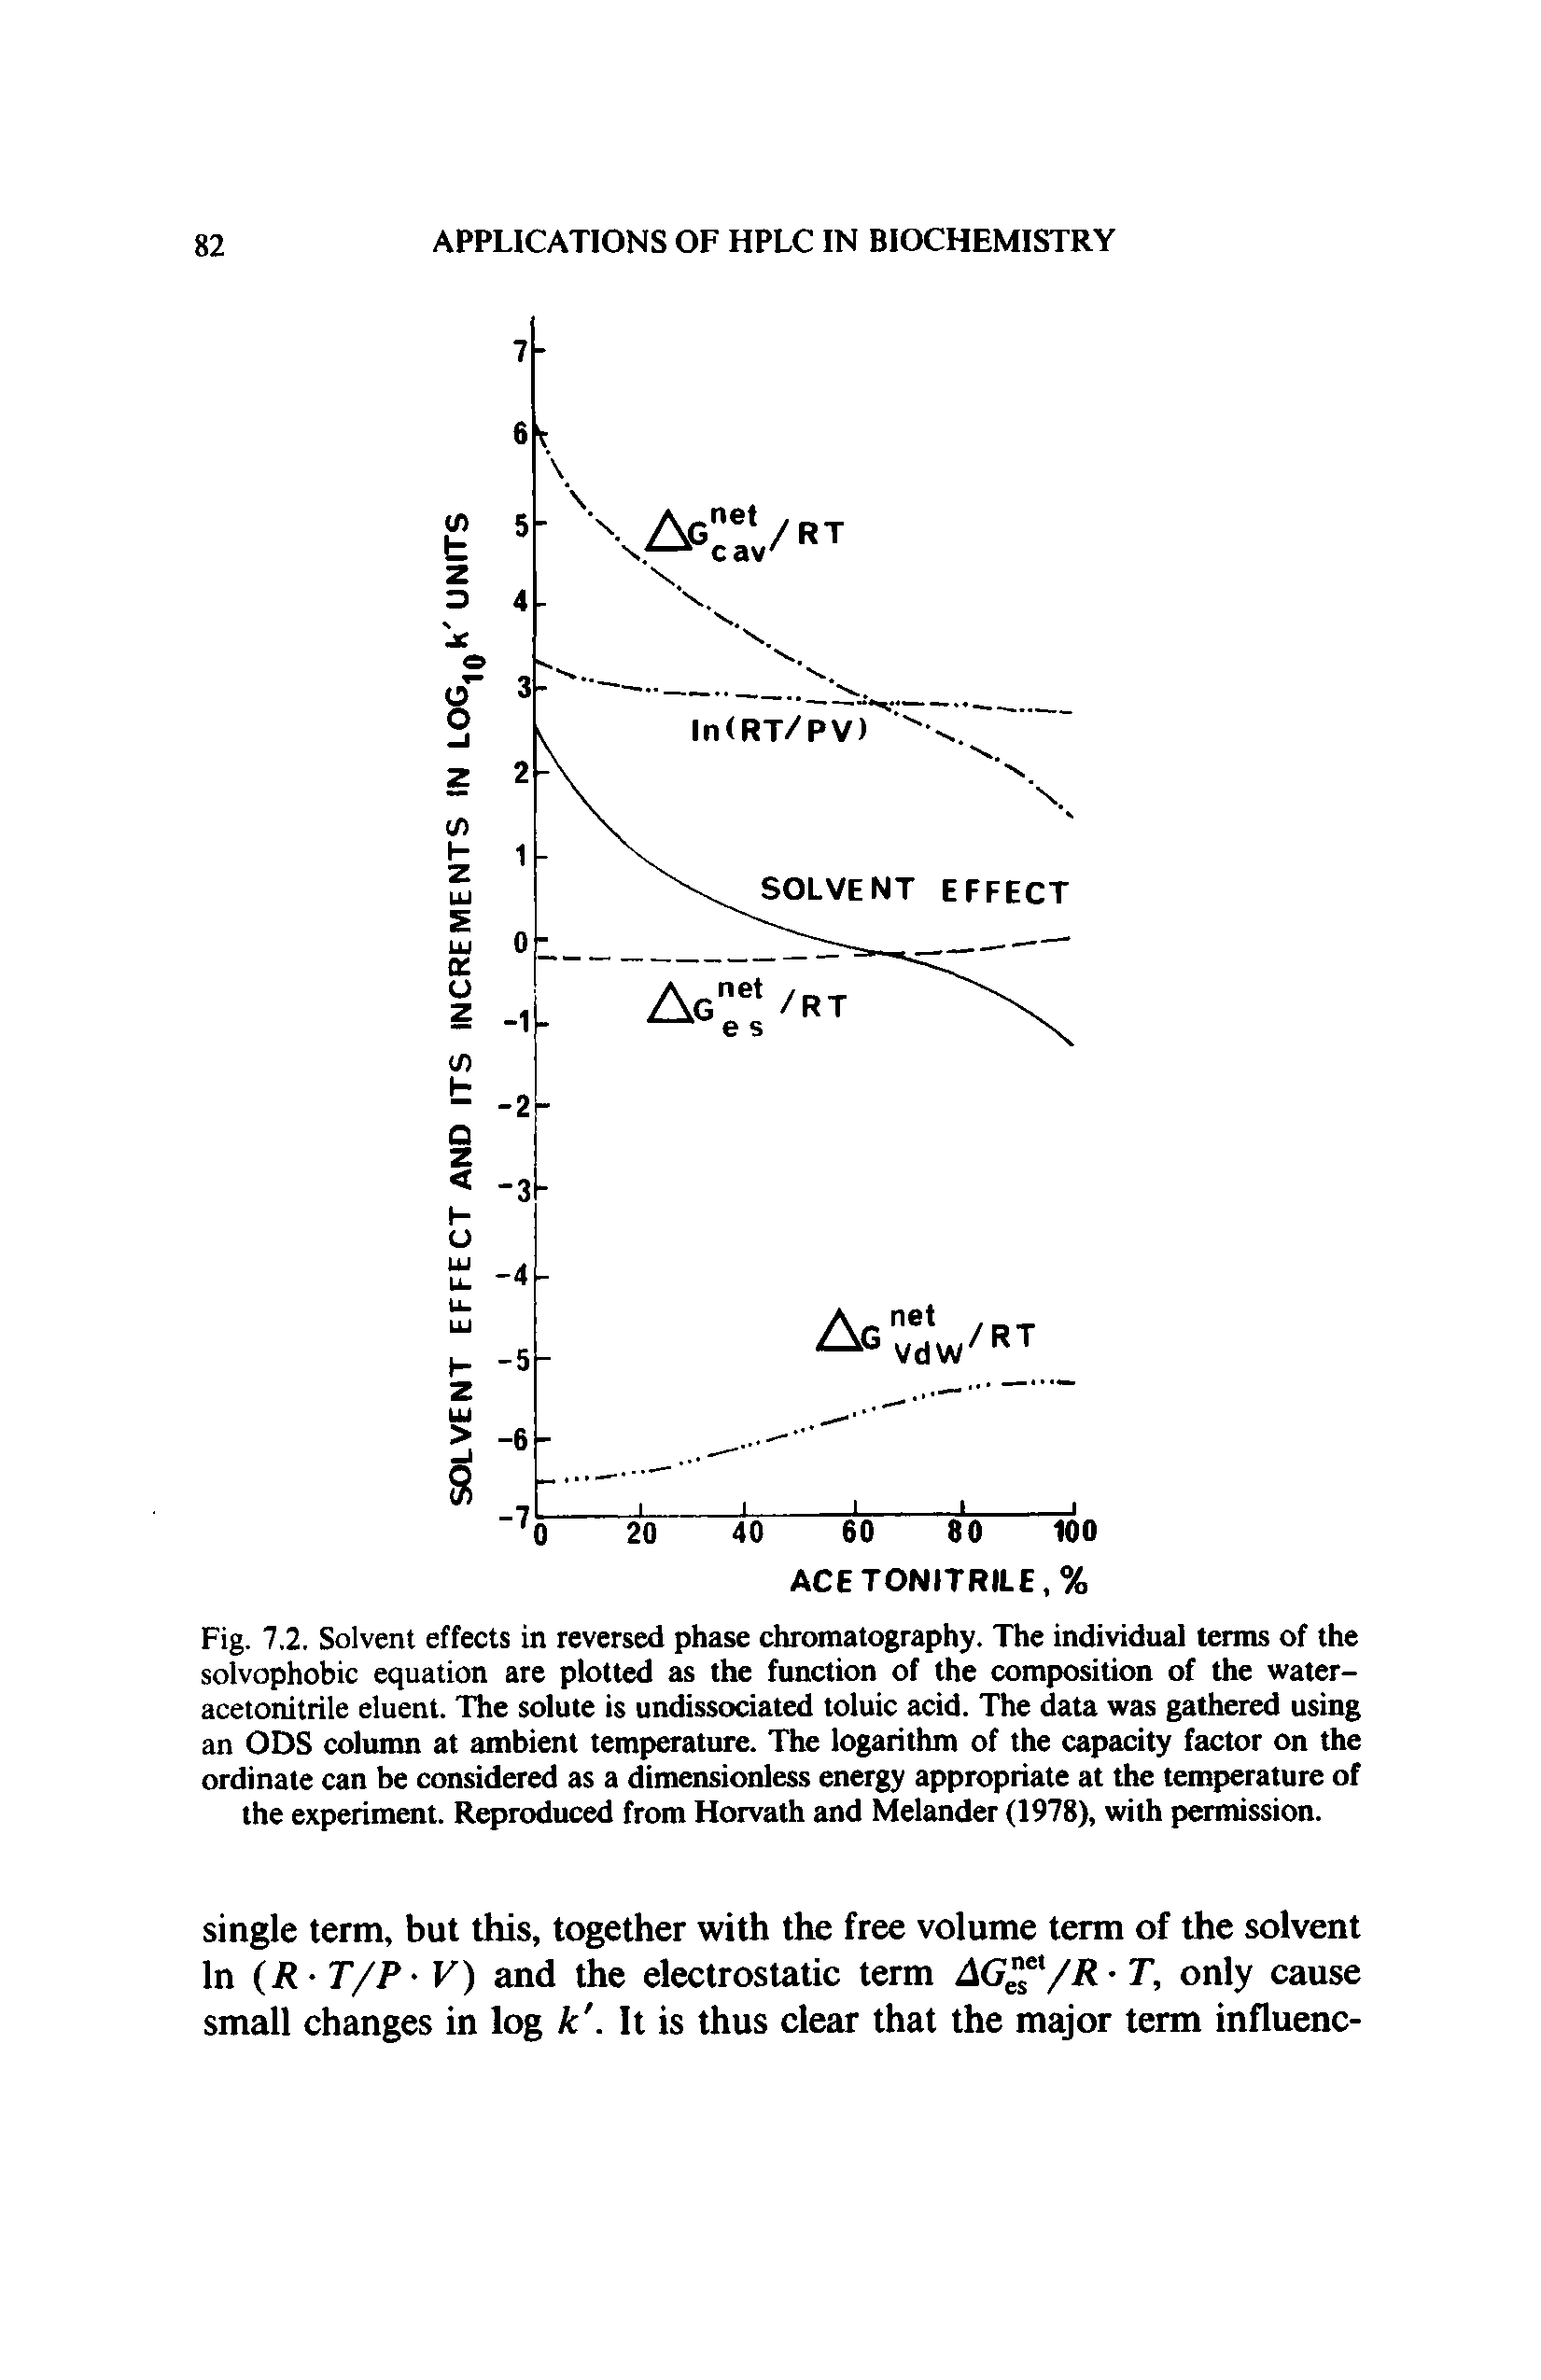 Fig. 7,2. Solvent effects in reversed phase chromatography. The individual terms of the solvophobic equation are plotted as the function of the composition of the water-acetonitrile eluent. The solute is undissociated toluic acid. The data was gathered using an ODS column at ambient temperature. The logarithm of the capacity factor on the ordinate can be considered as a dimensionless energy appropriate at the temperature of the experiment. Reproduced from Horvath and Melander (1978), with permission.